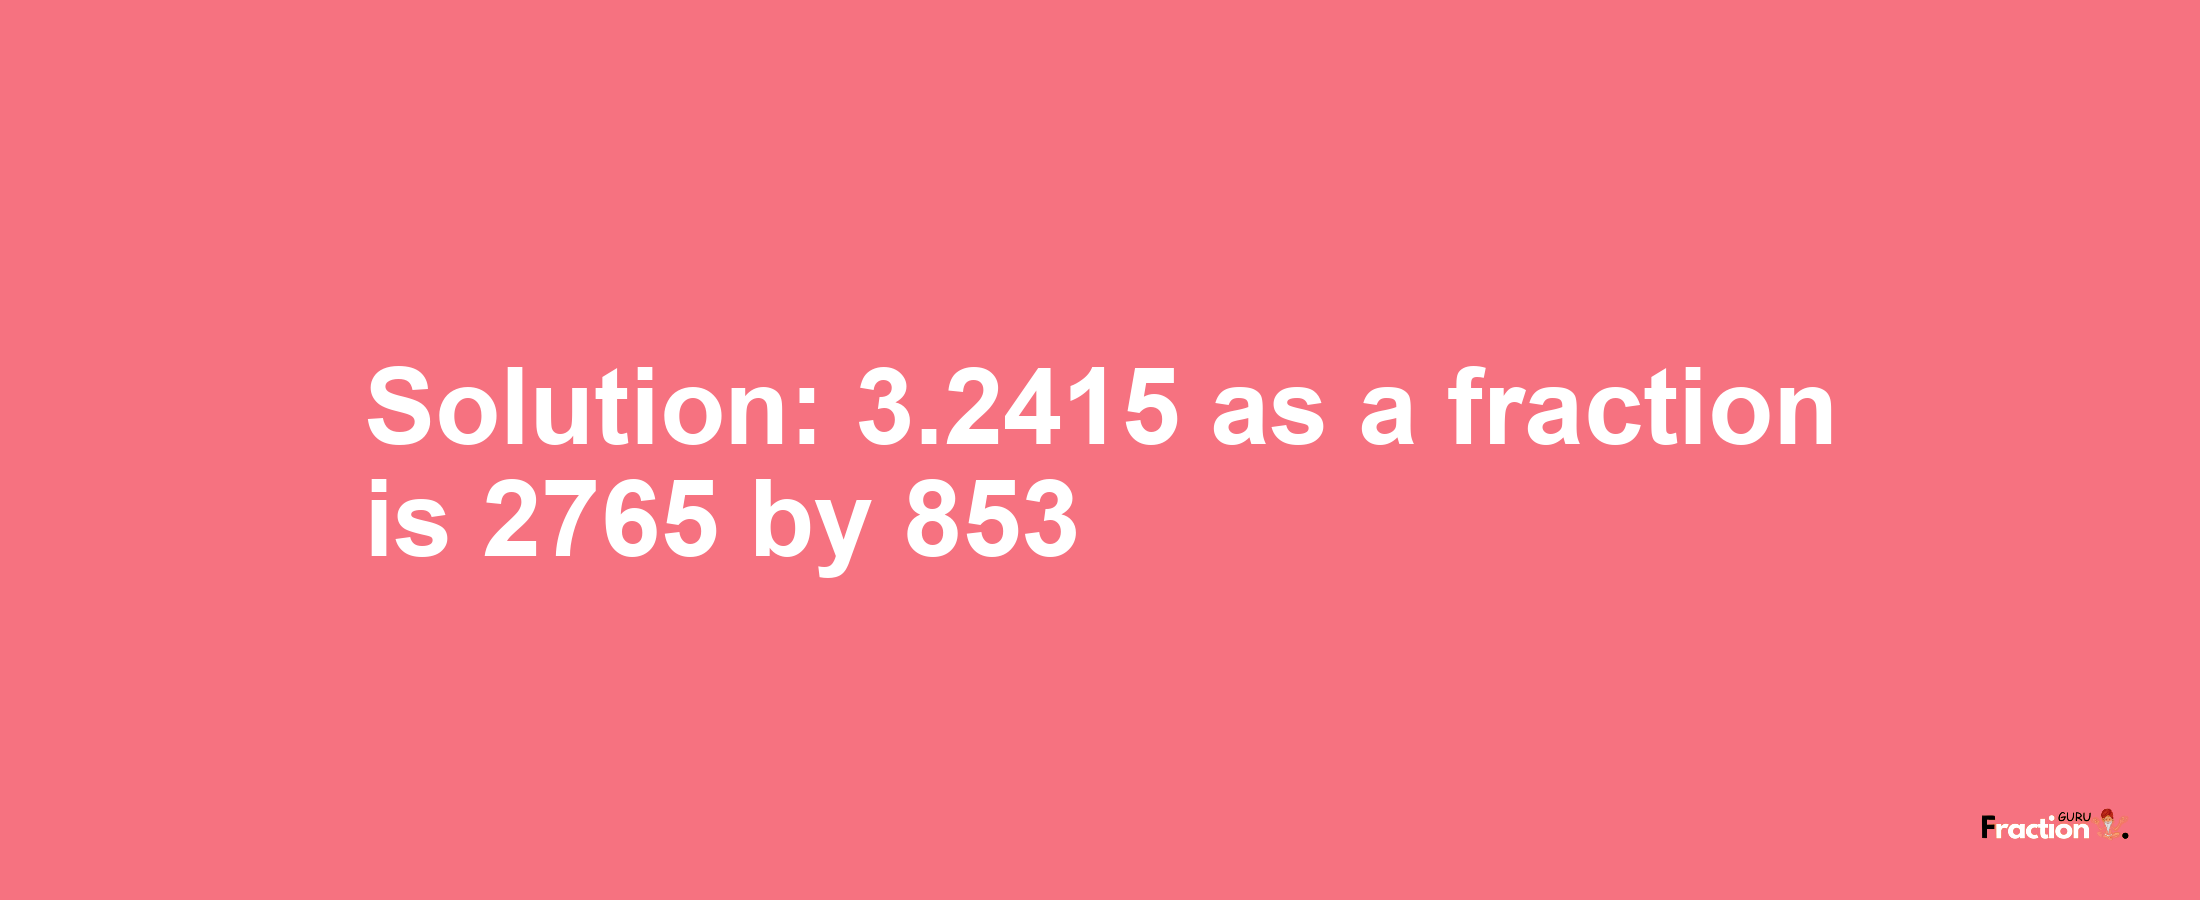 Solution:3.2415 as a fraction is 2765/853